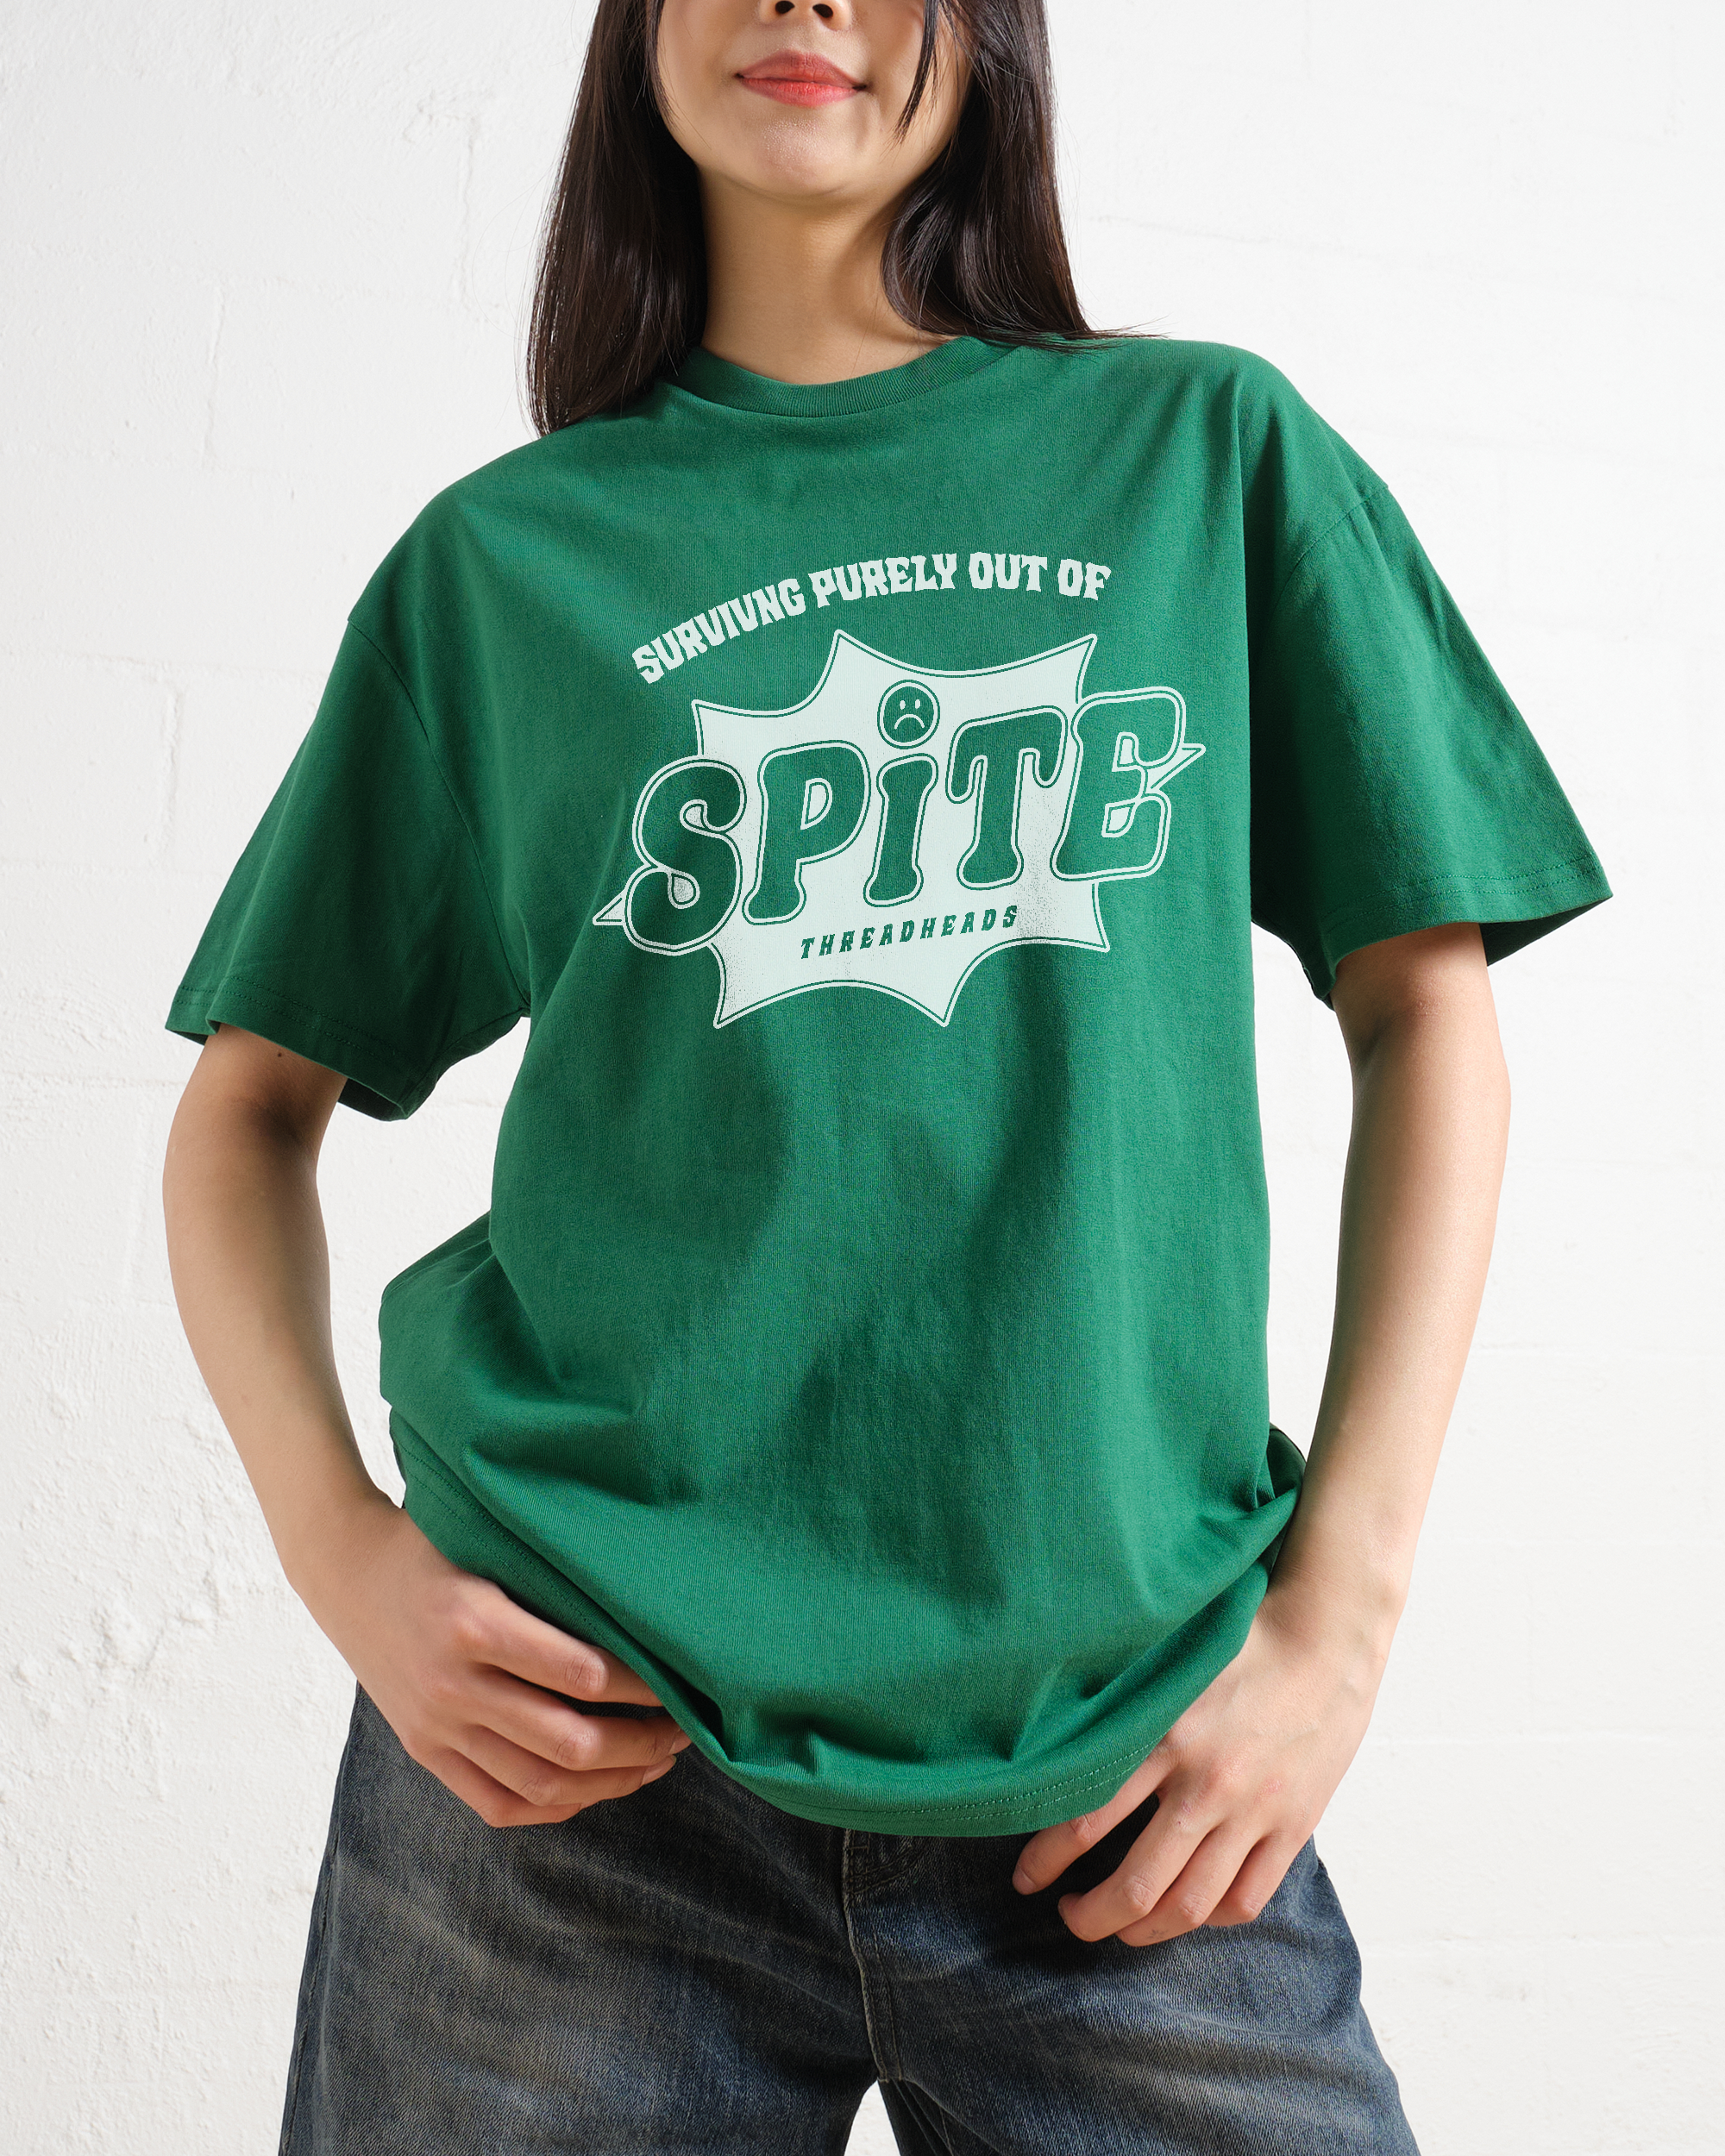 Surviving Purely Out Of Spite T-Shirt